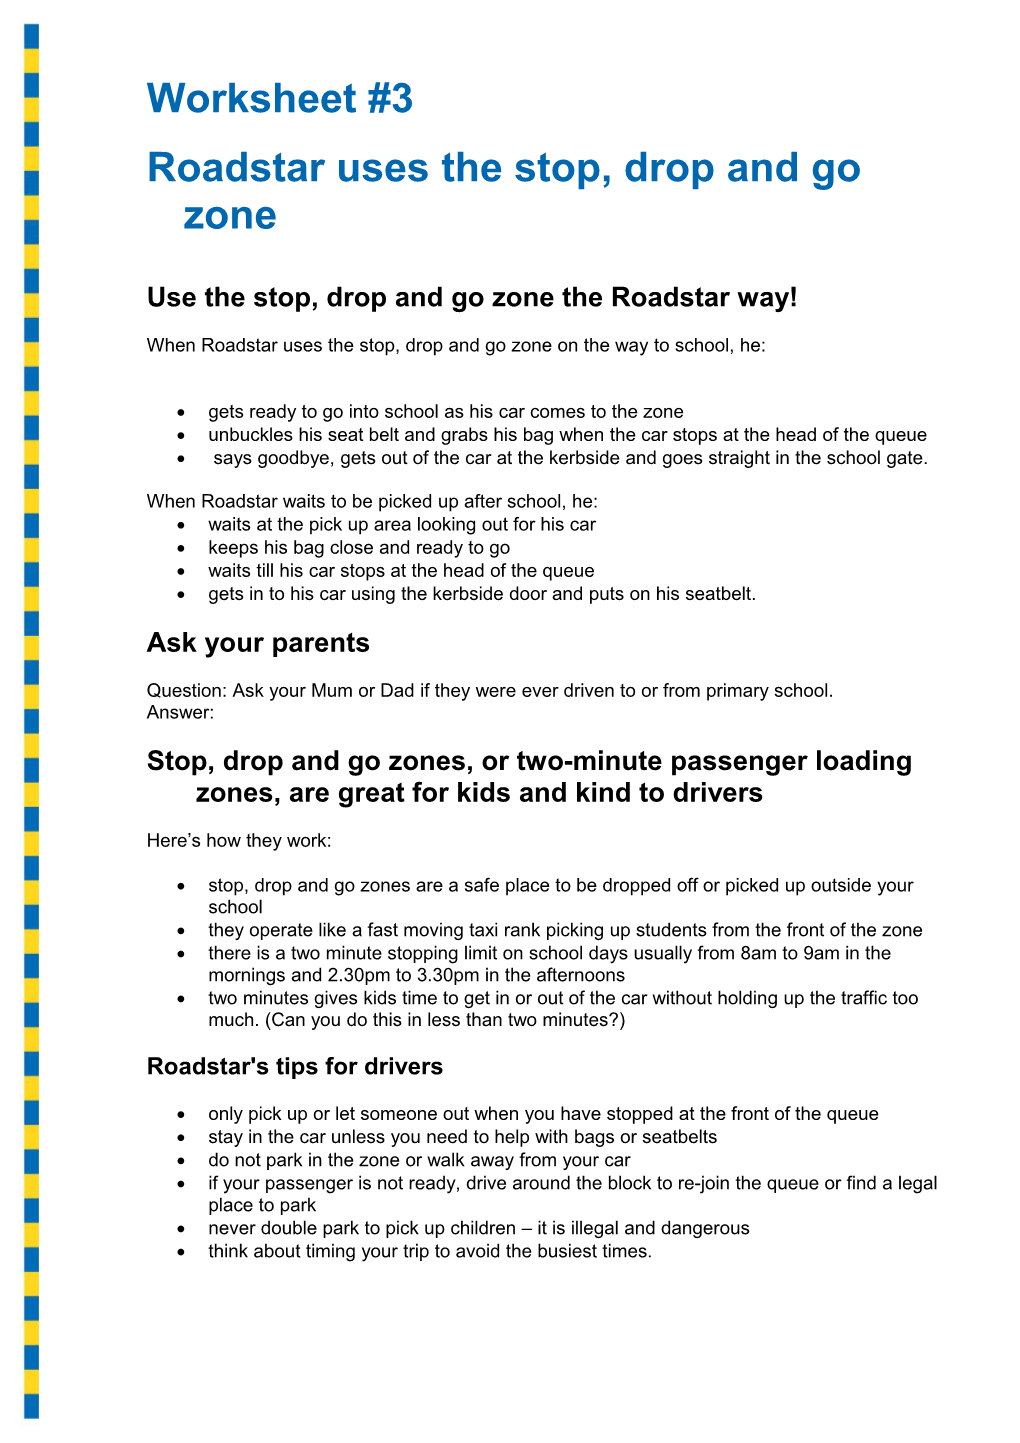 Active School Travel Worksheet 3 - Roadstar Uses the Stop, Drop and Go Zone